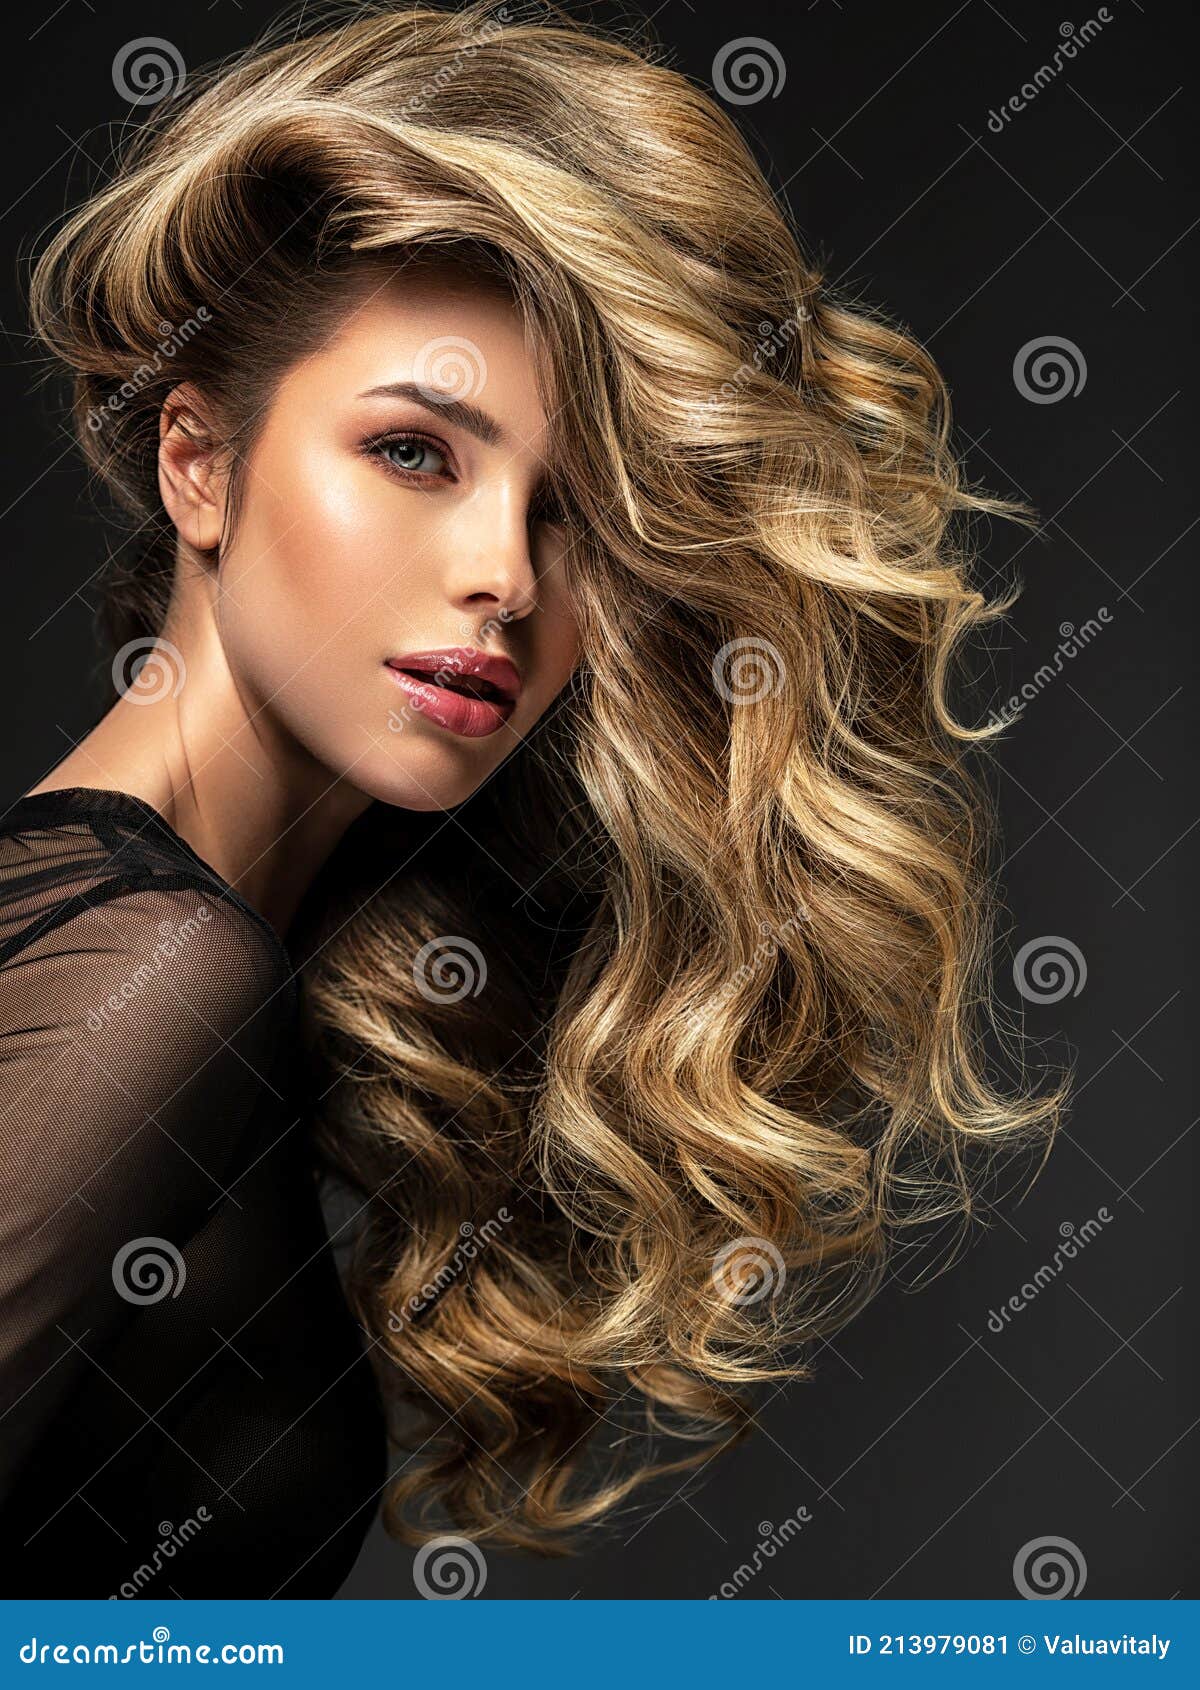 Portrait Of A Beautiful Woman With A Long Hair Pretty Blonde Girl With Curly Hairstyle Stock 